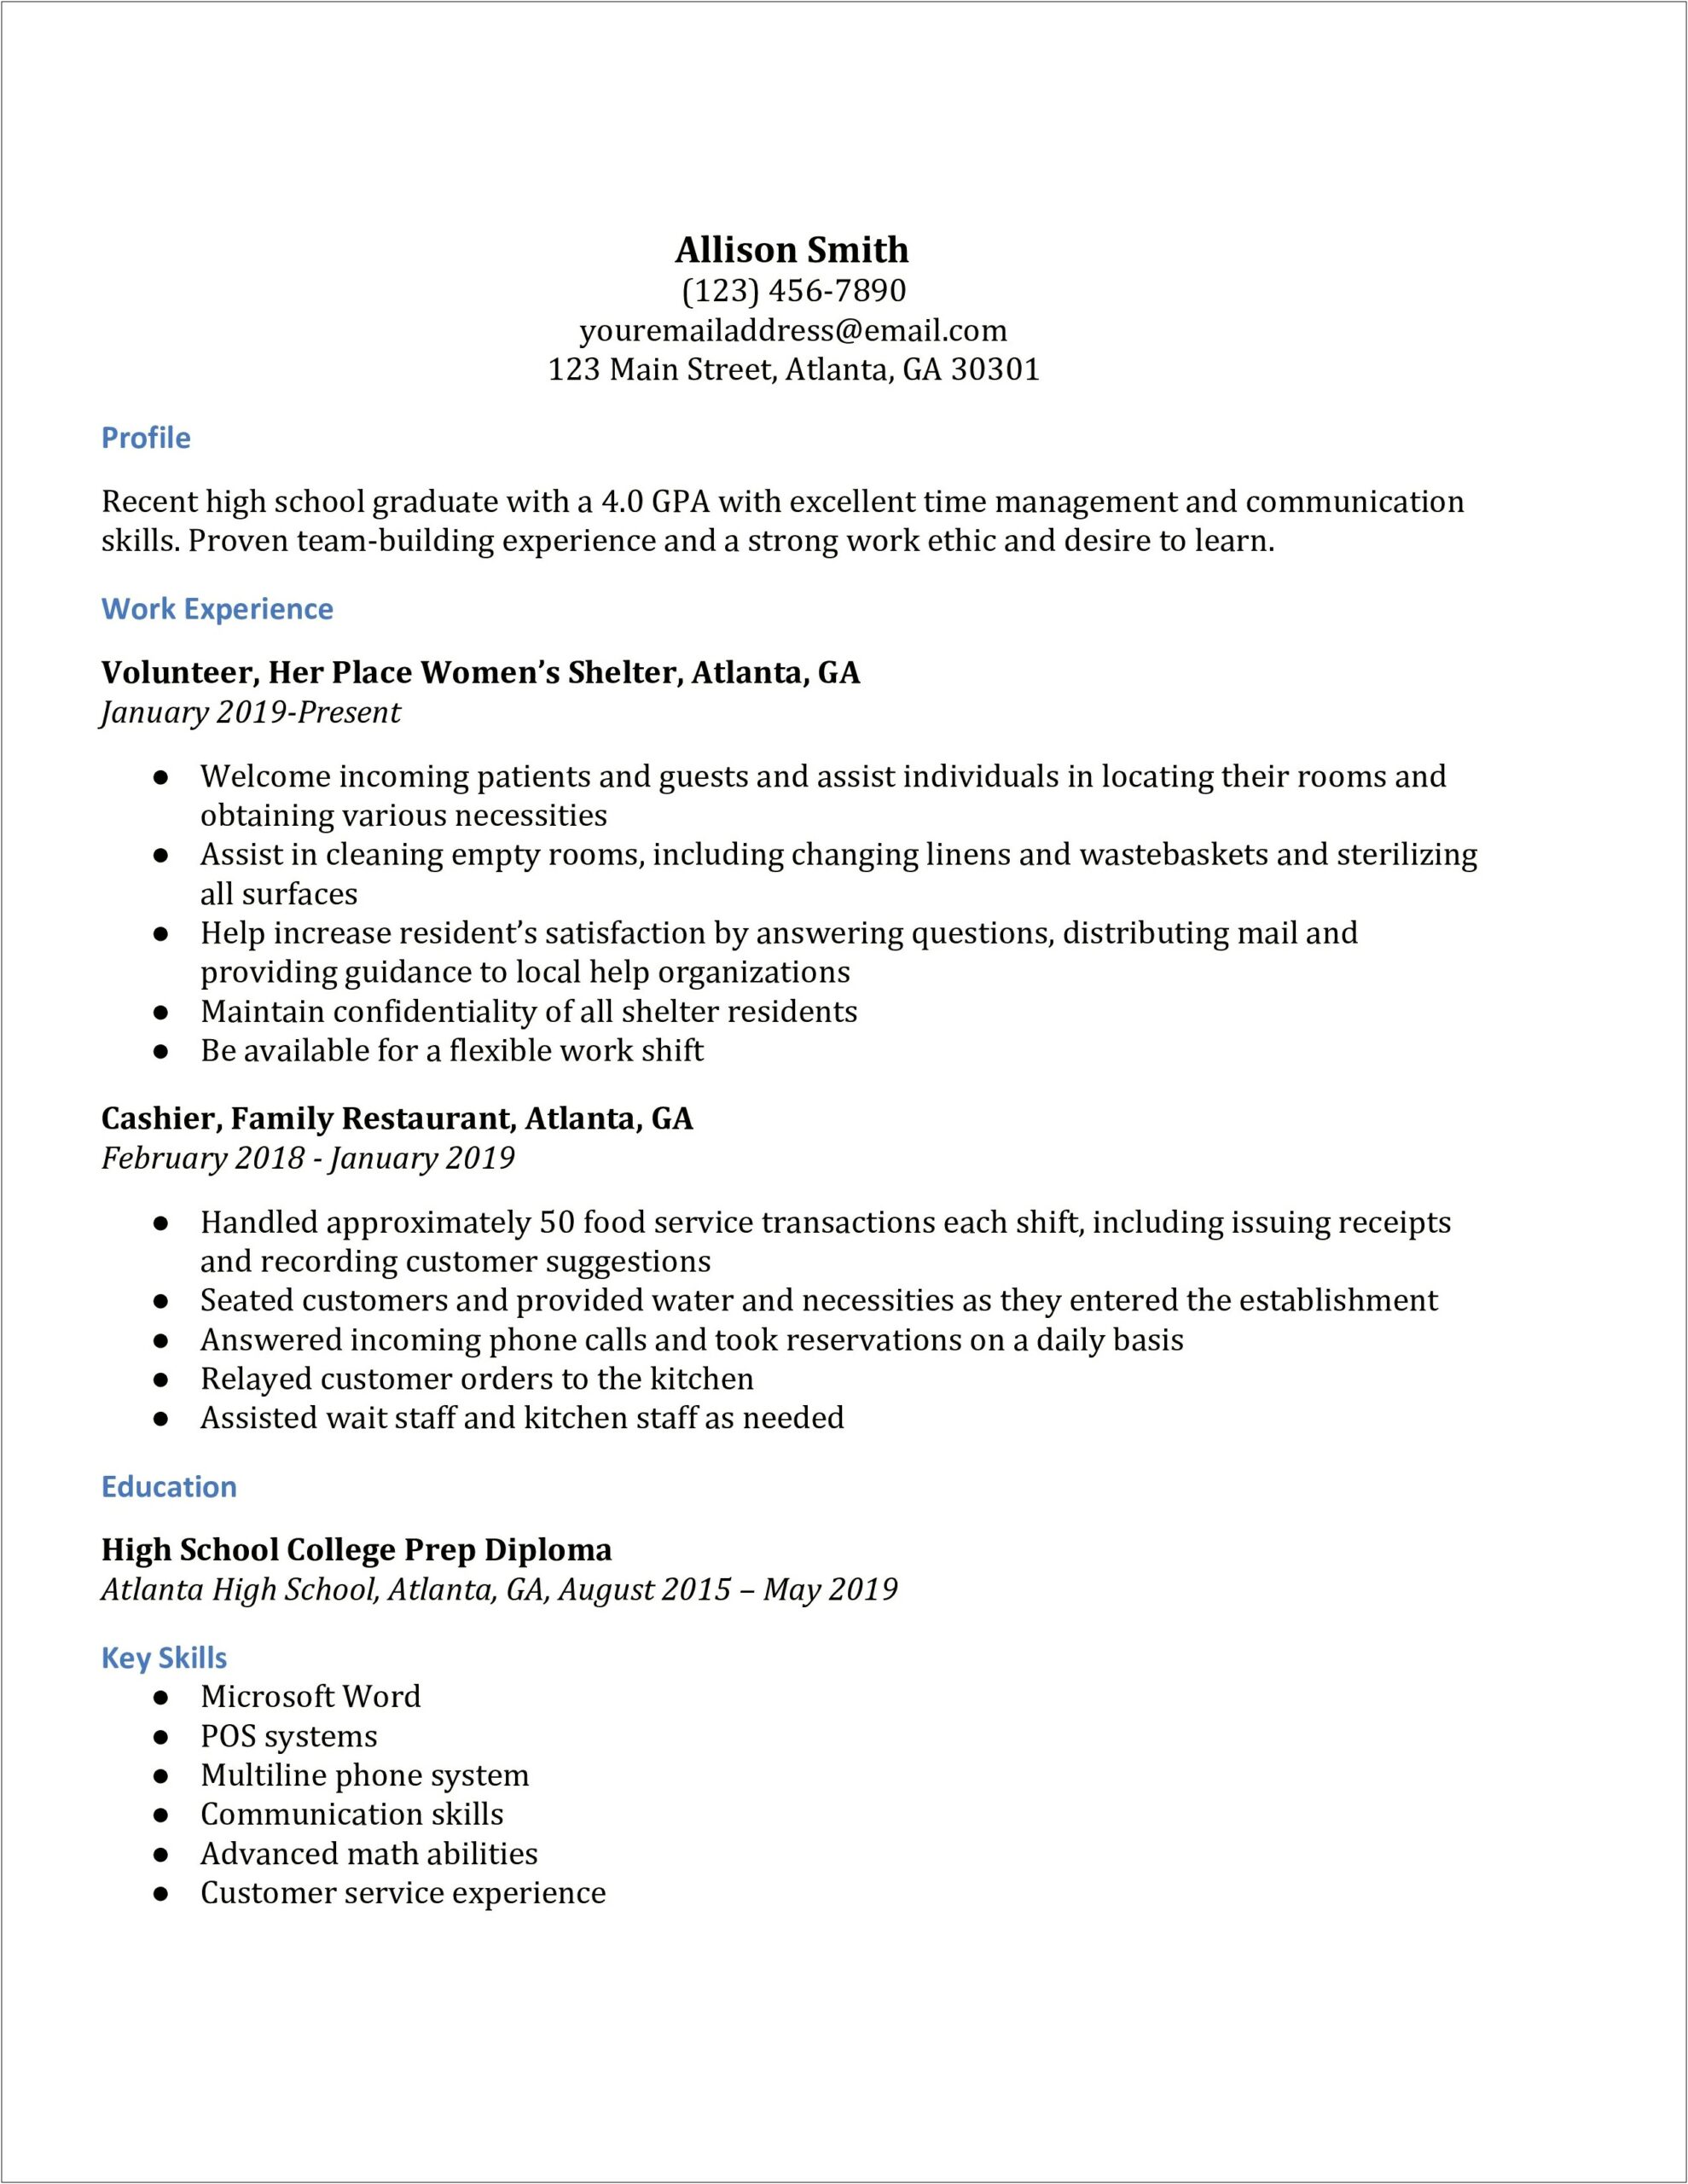 Education On Resume Examples High School